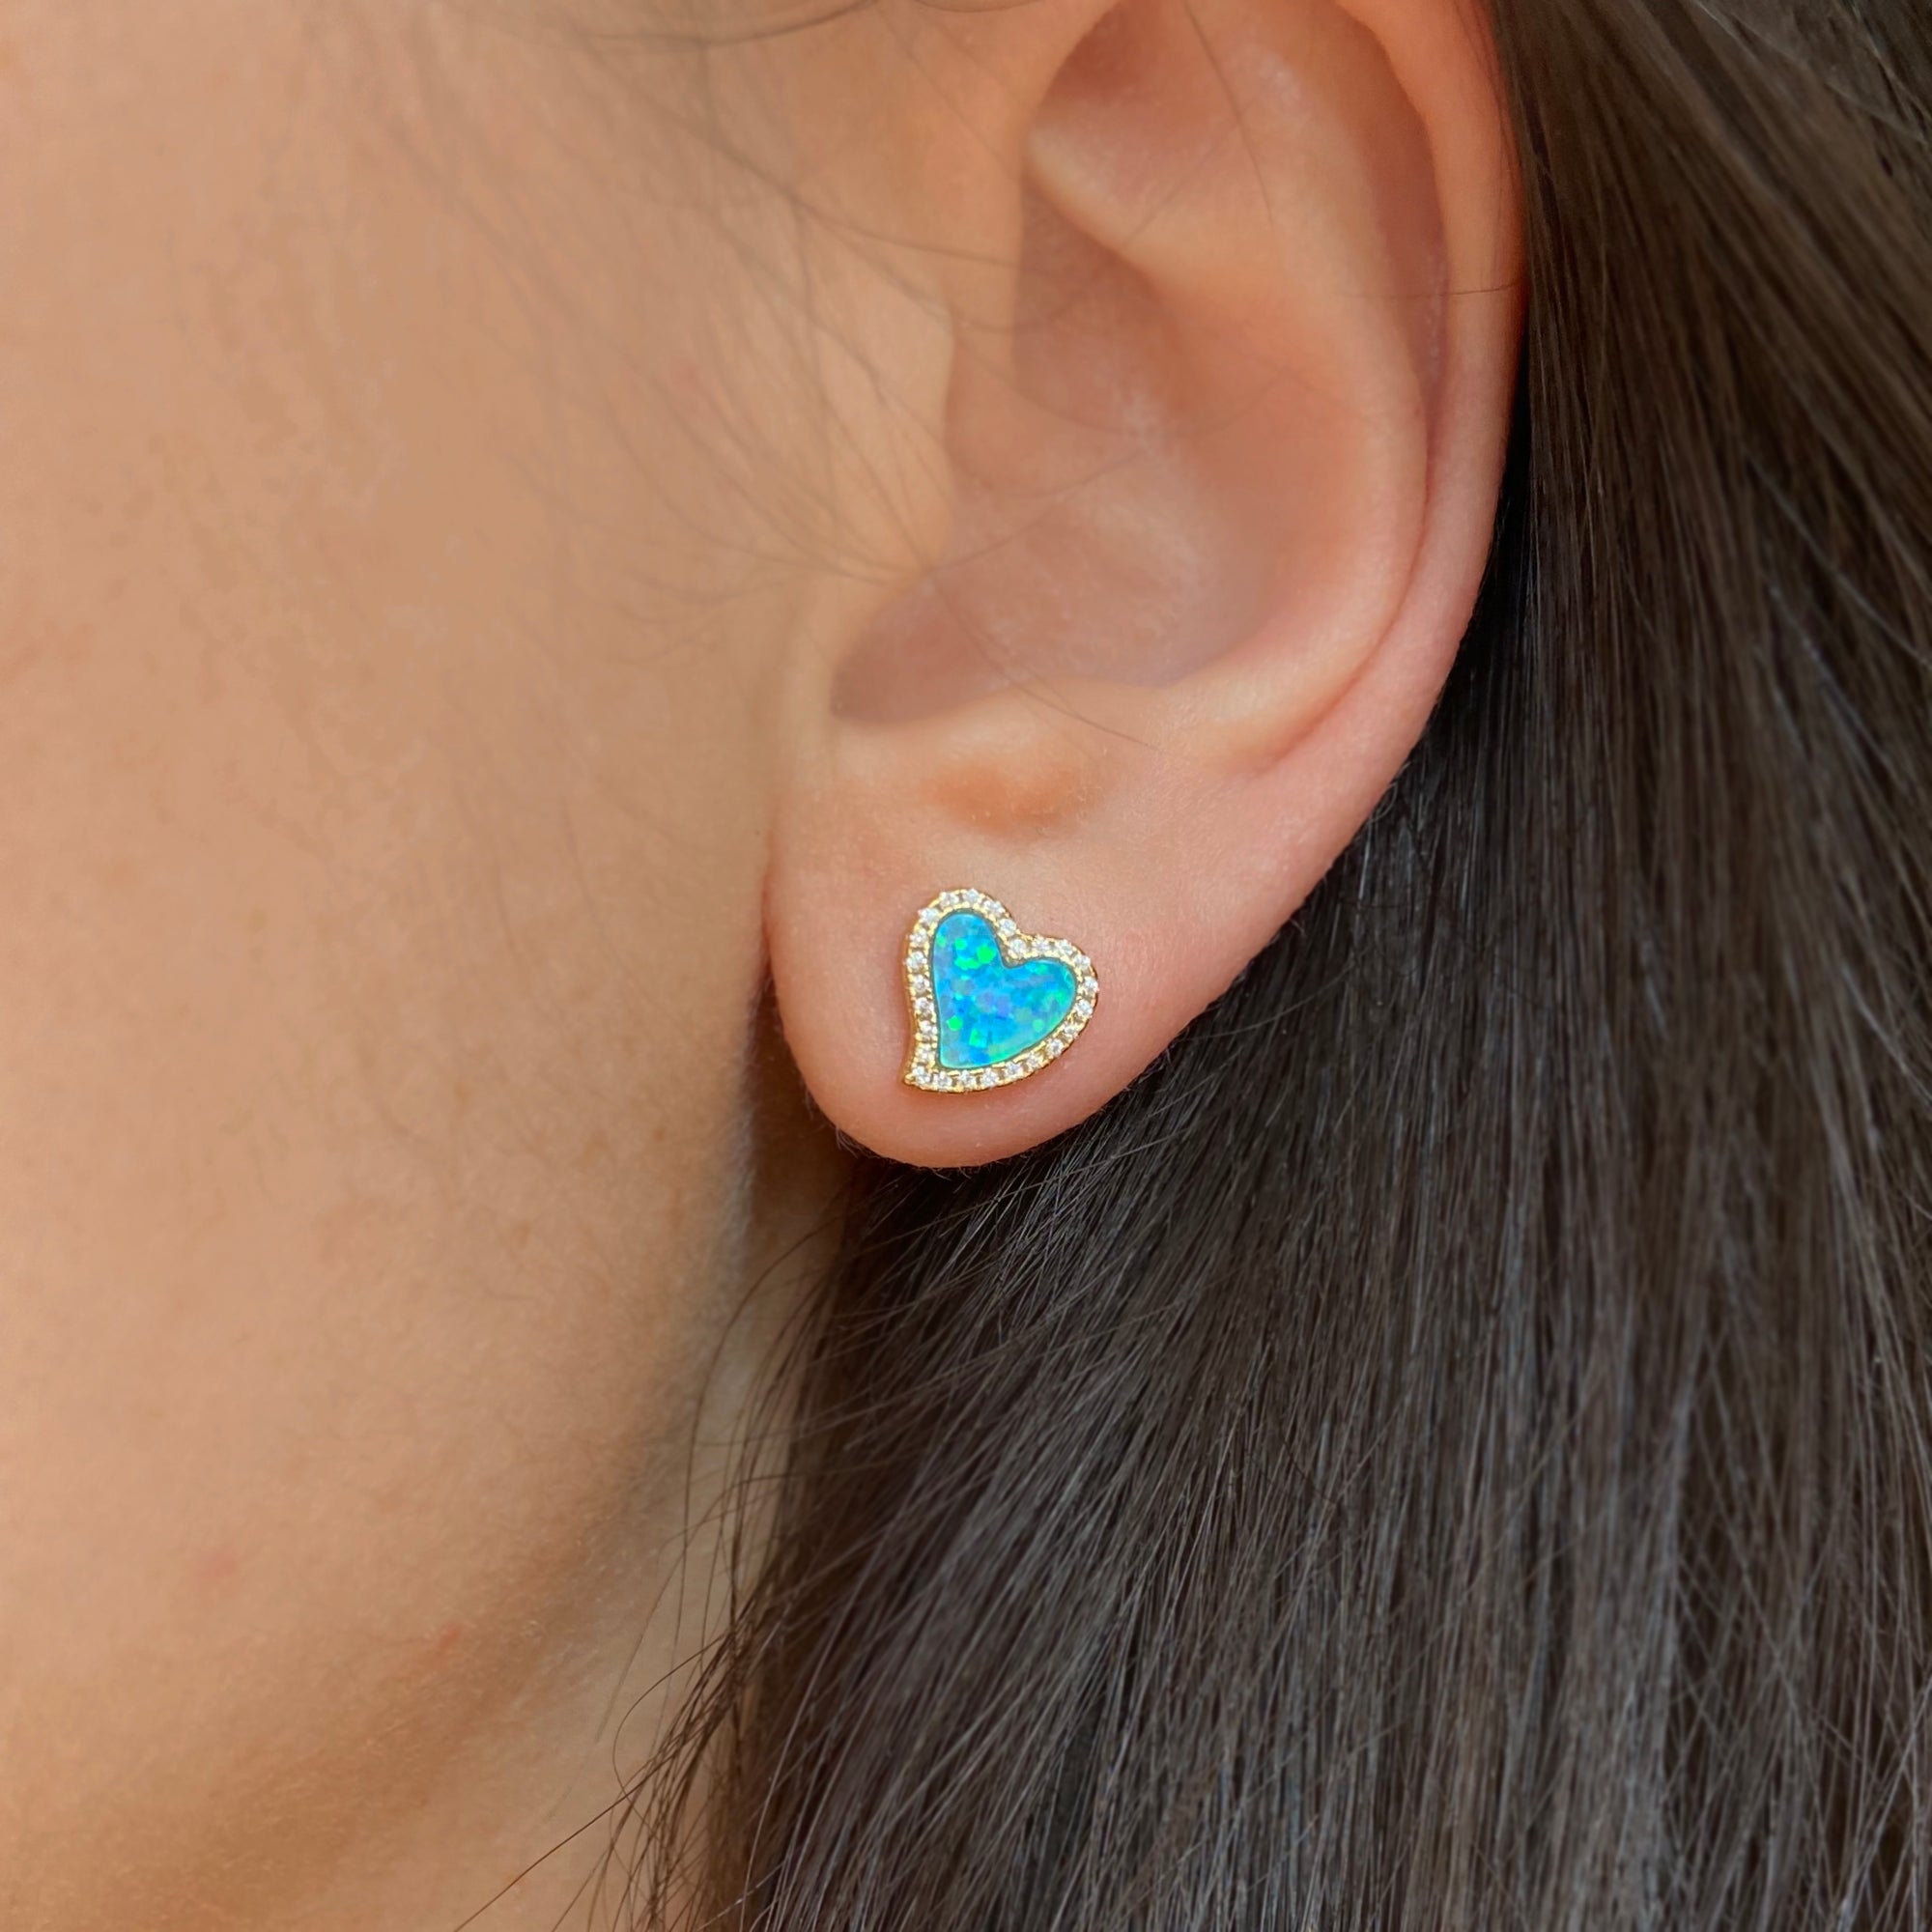 Amore heart stud earrings with crystals in blue opal